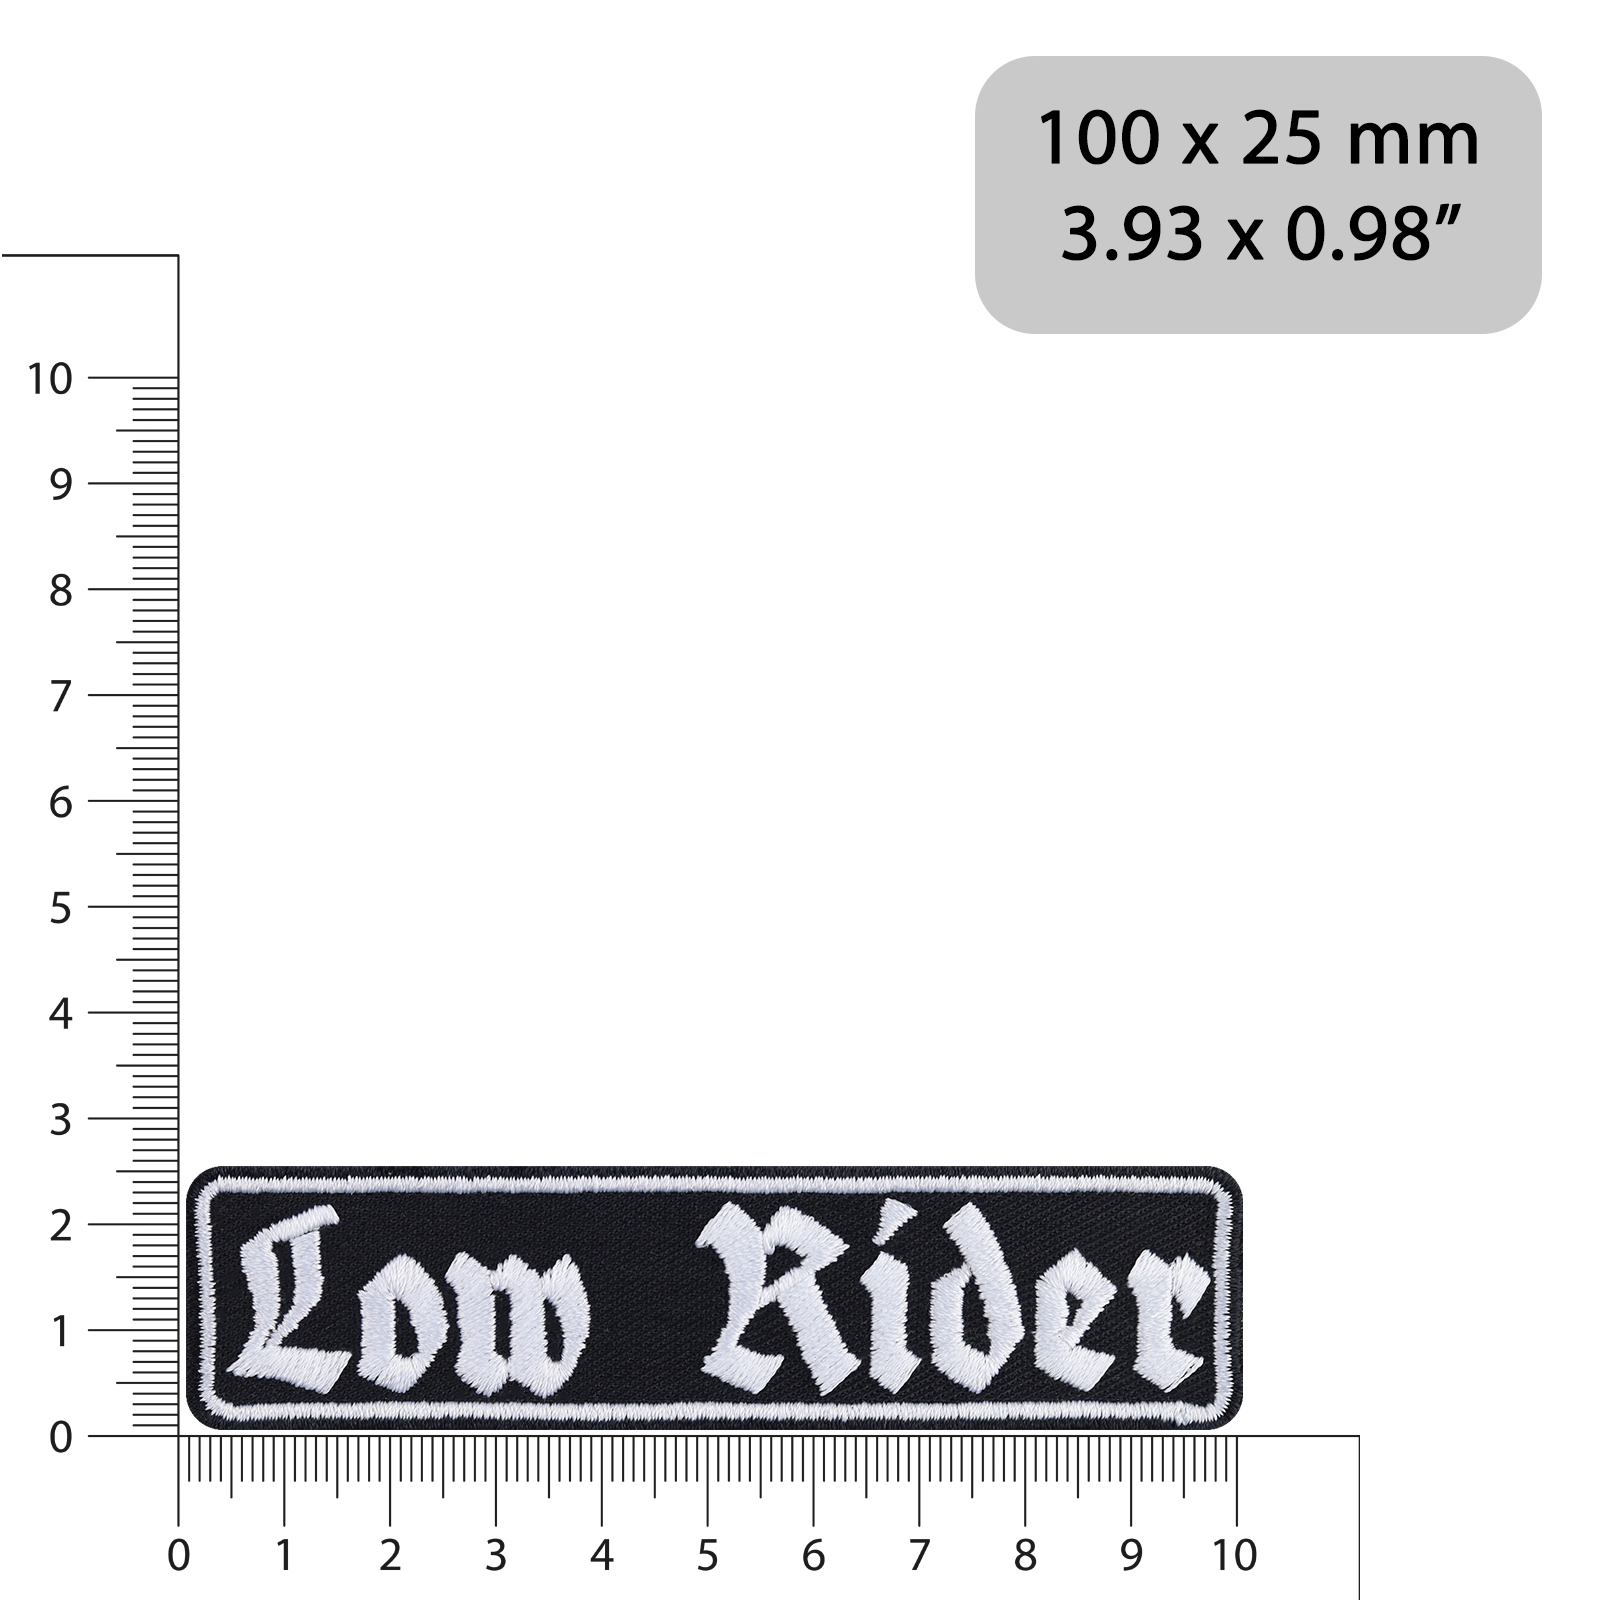 Low rider - Patch